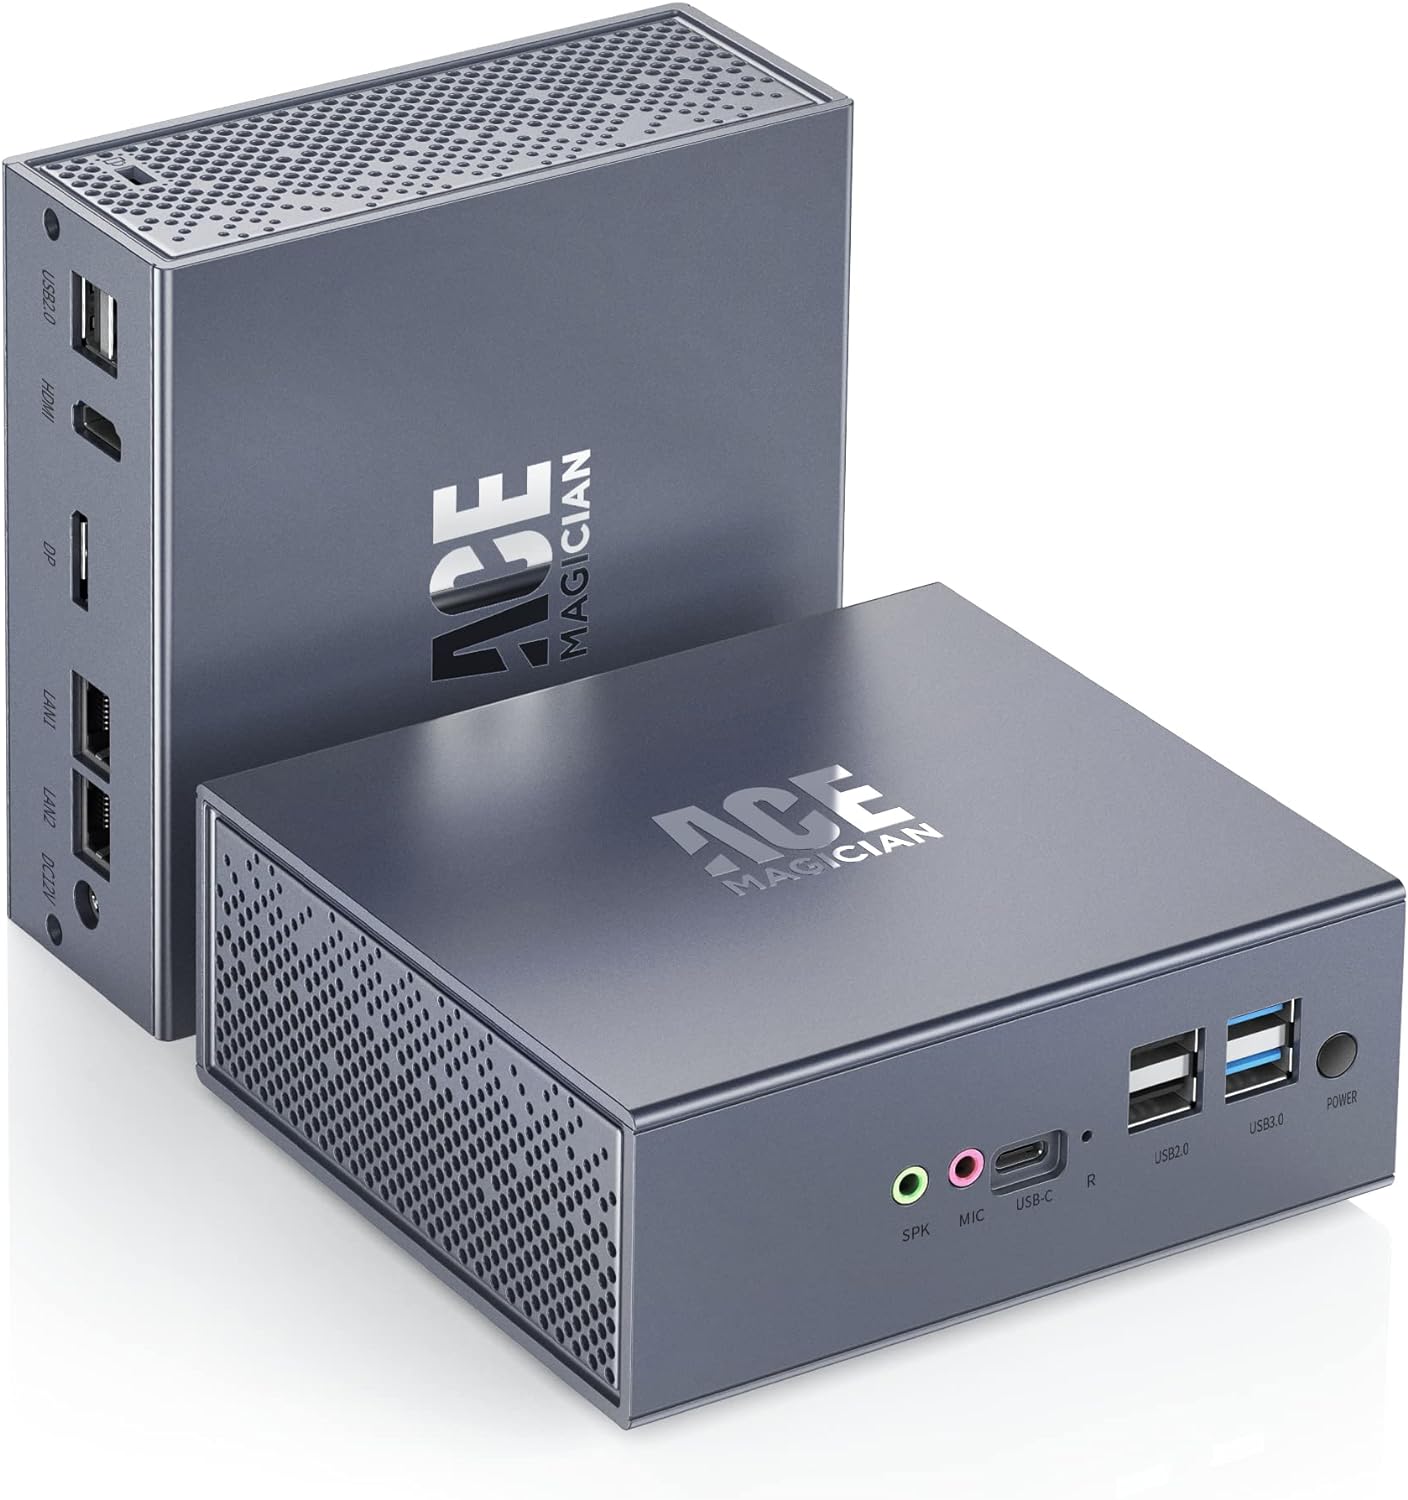 ACEMAGICIAN Mini PC, Intel 12th Gen Alder Lake N95(up to 3.4GHz), 16GB DDR4 RAM 512GB M.2 SSD, Windows 11 Pro Mini Desktop Computer Support 4K Dual Display/USB3.0/WiFi5/BT4.2 for Home Office Business